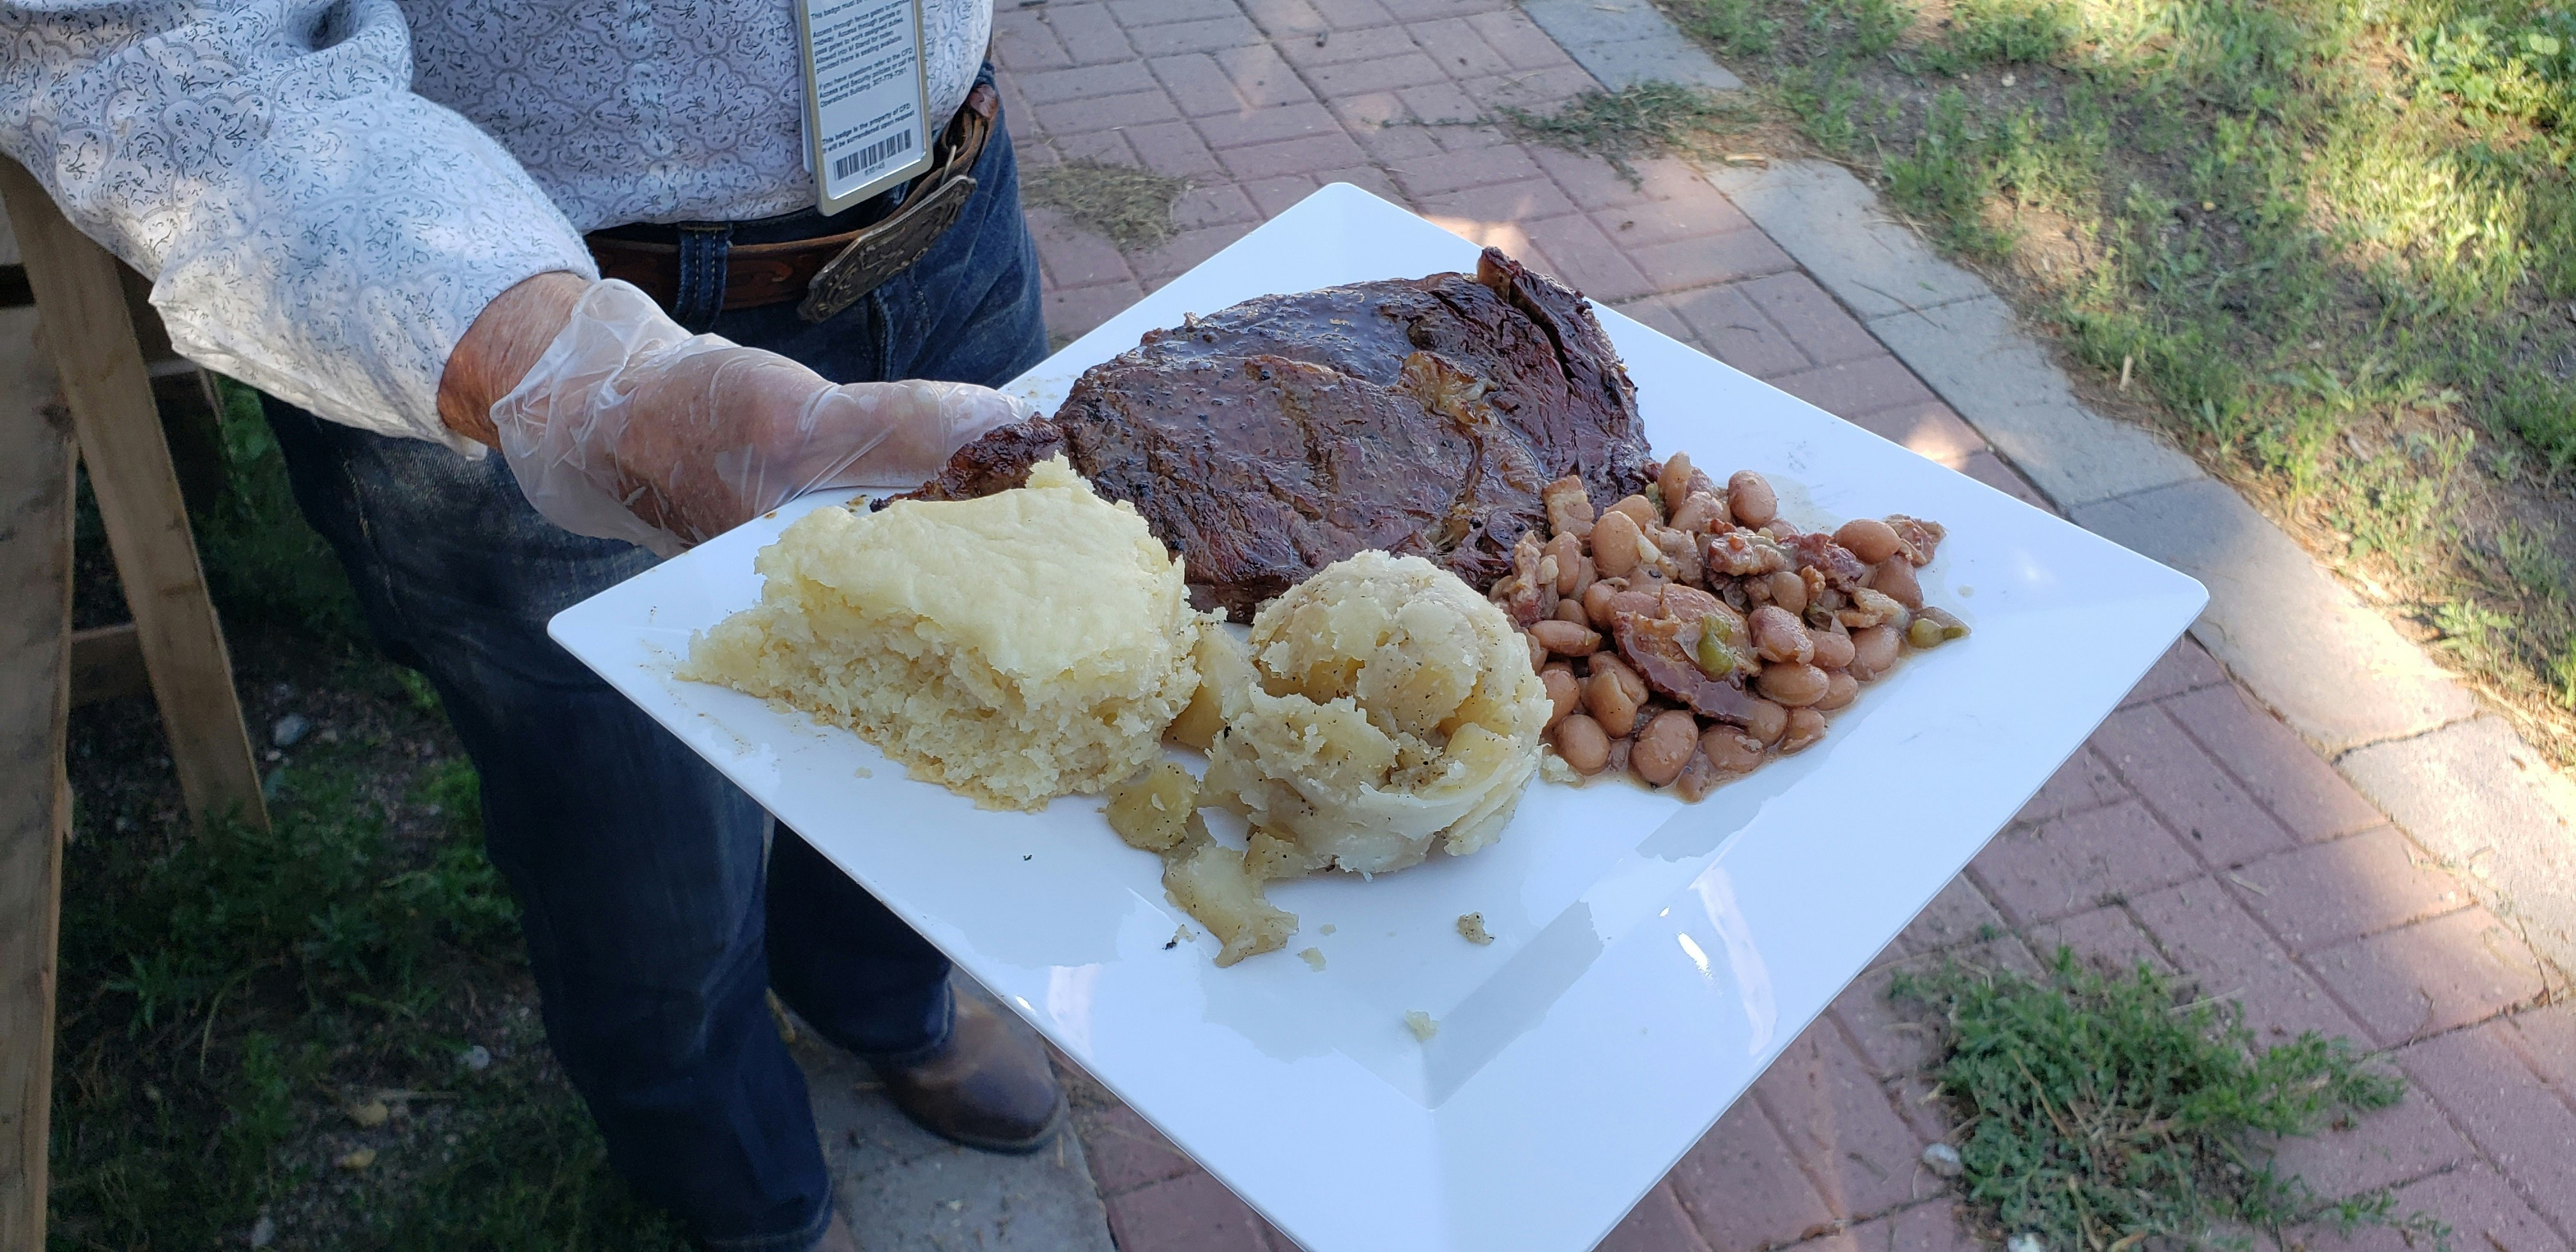 Ribeye, mashed potatoes, sourdough biscuits and beans all cooked over an open campfire, on the grill or in a Dutch oven..